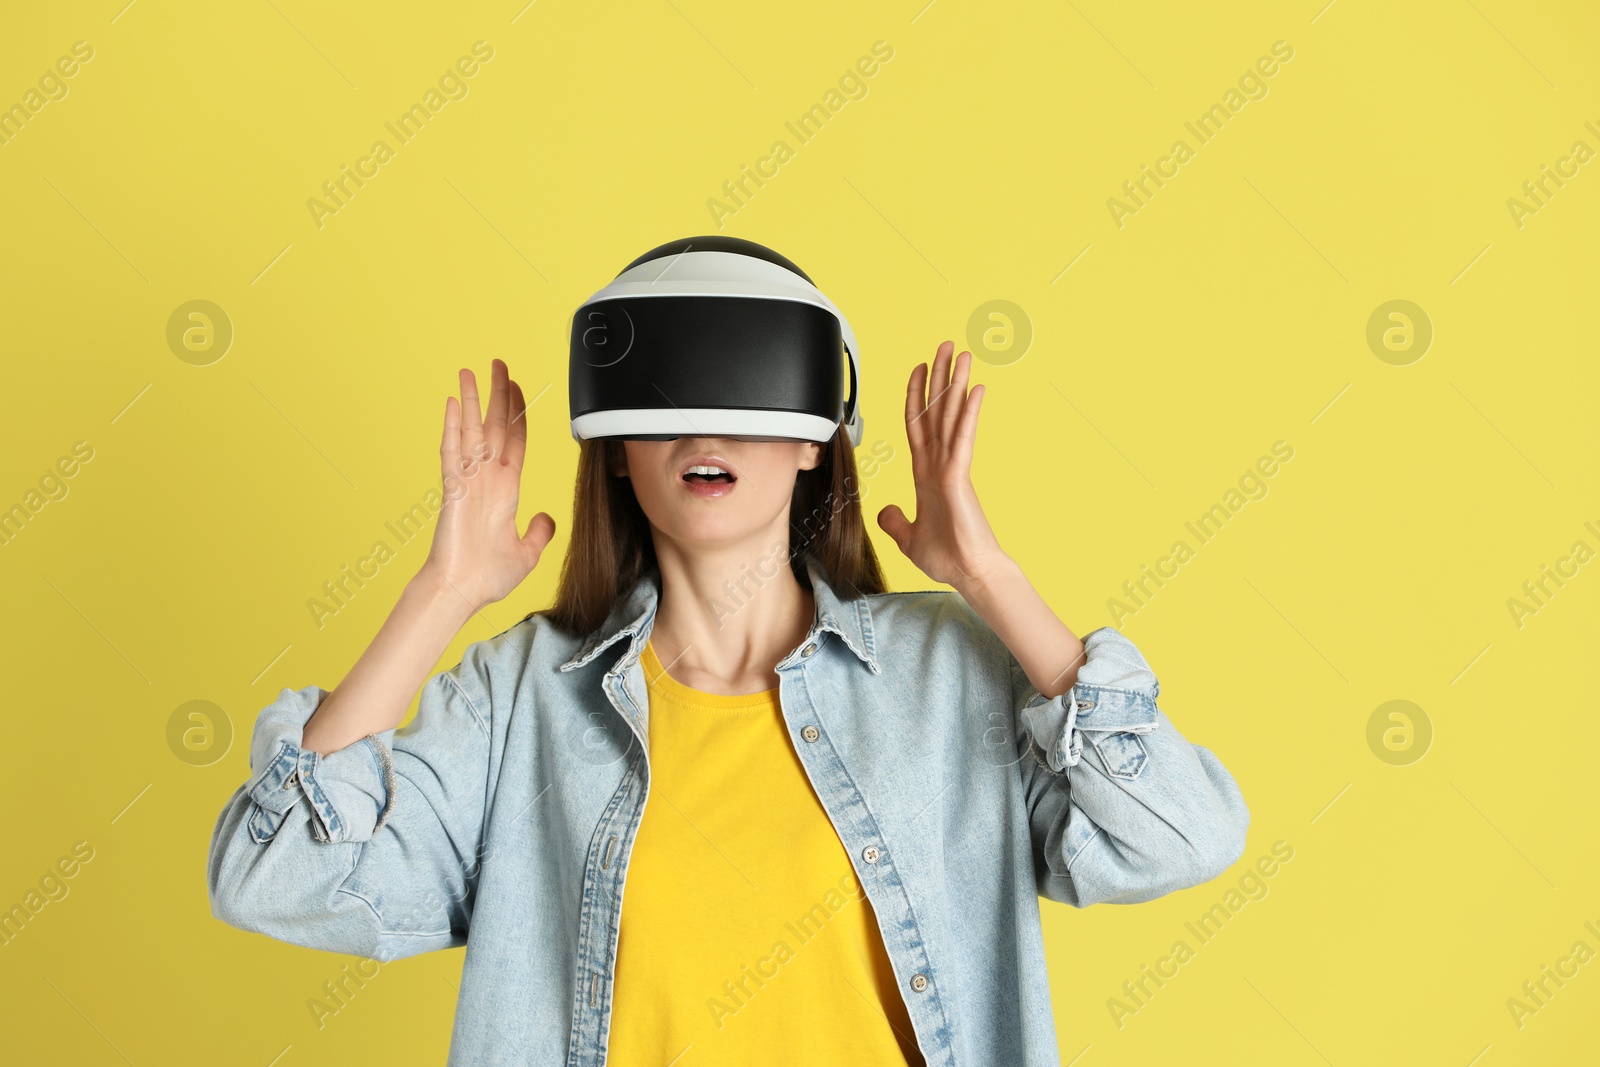 Photo of Surprised woman using virtual reality headset on yellow background